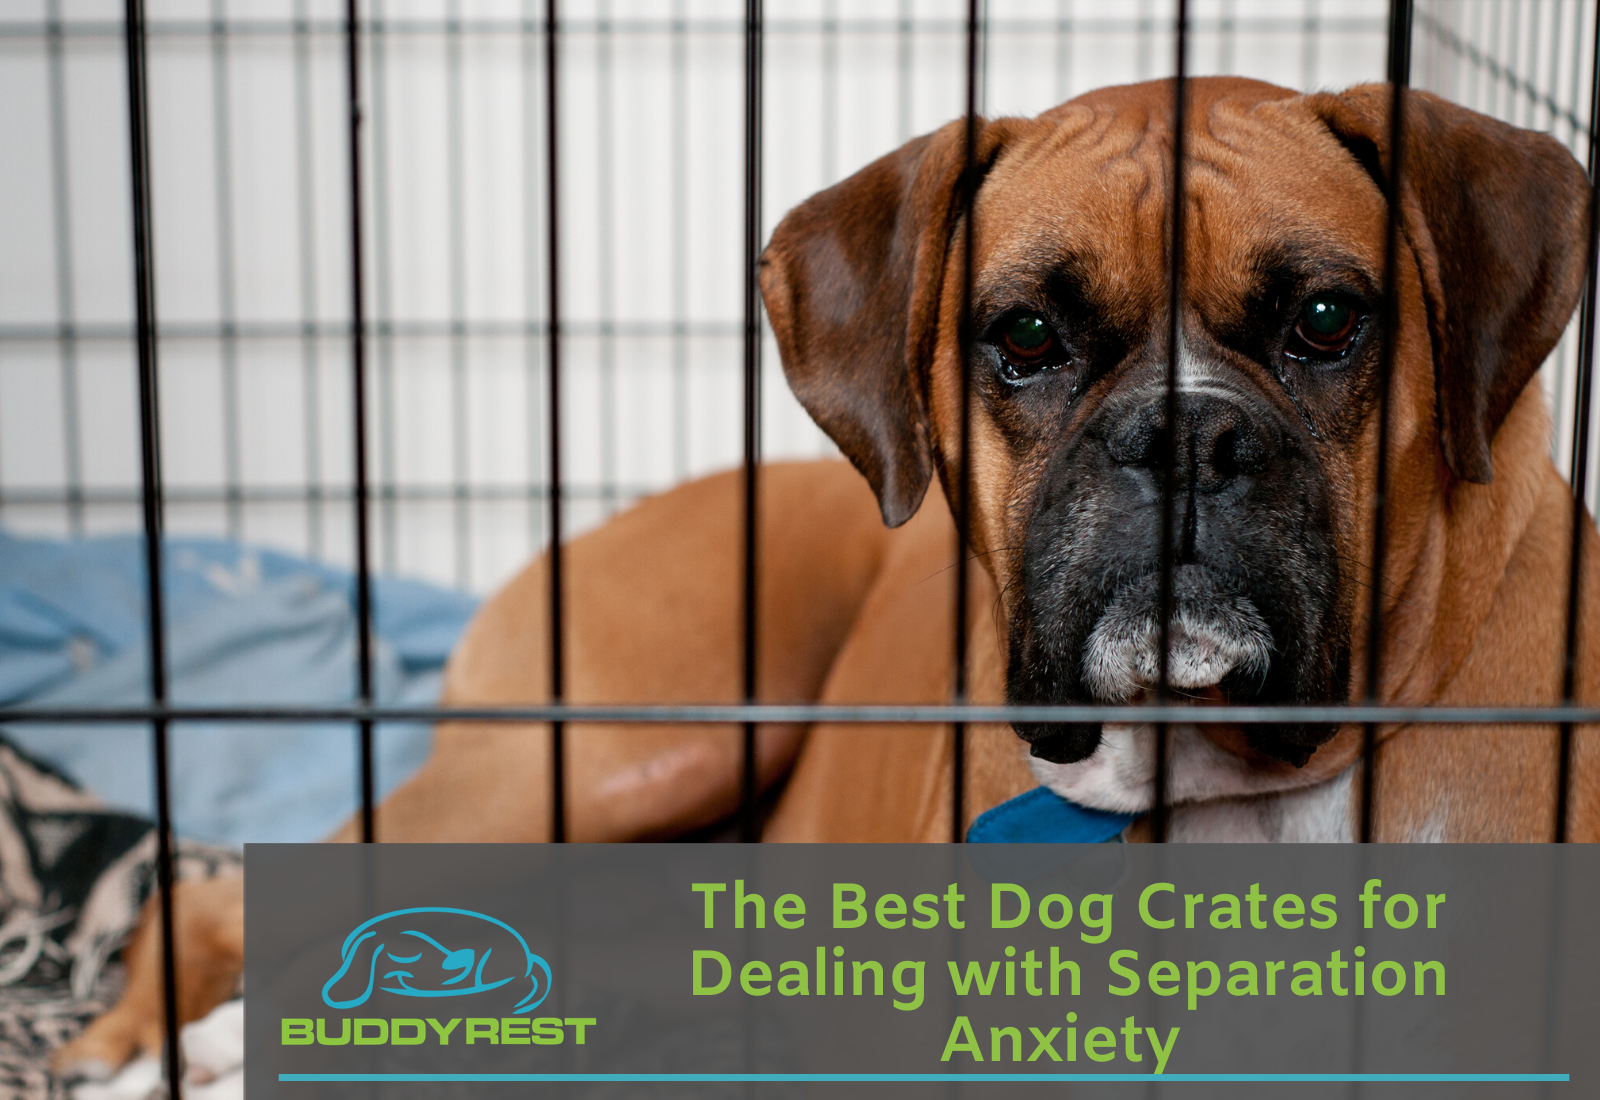 The Best Dog Crates for Dealing with Separation Anxiety